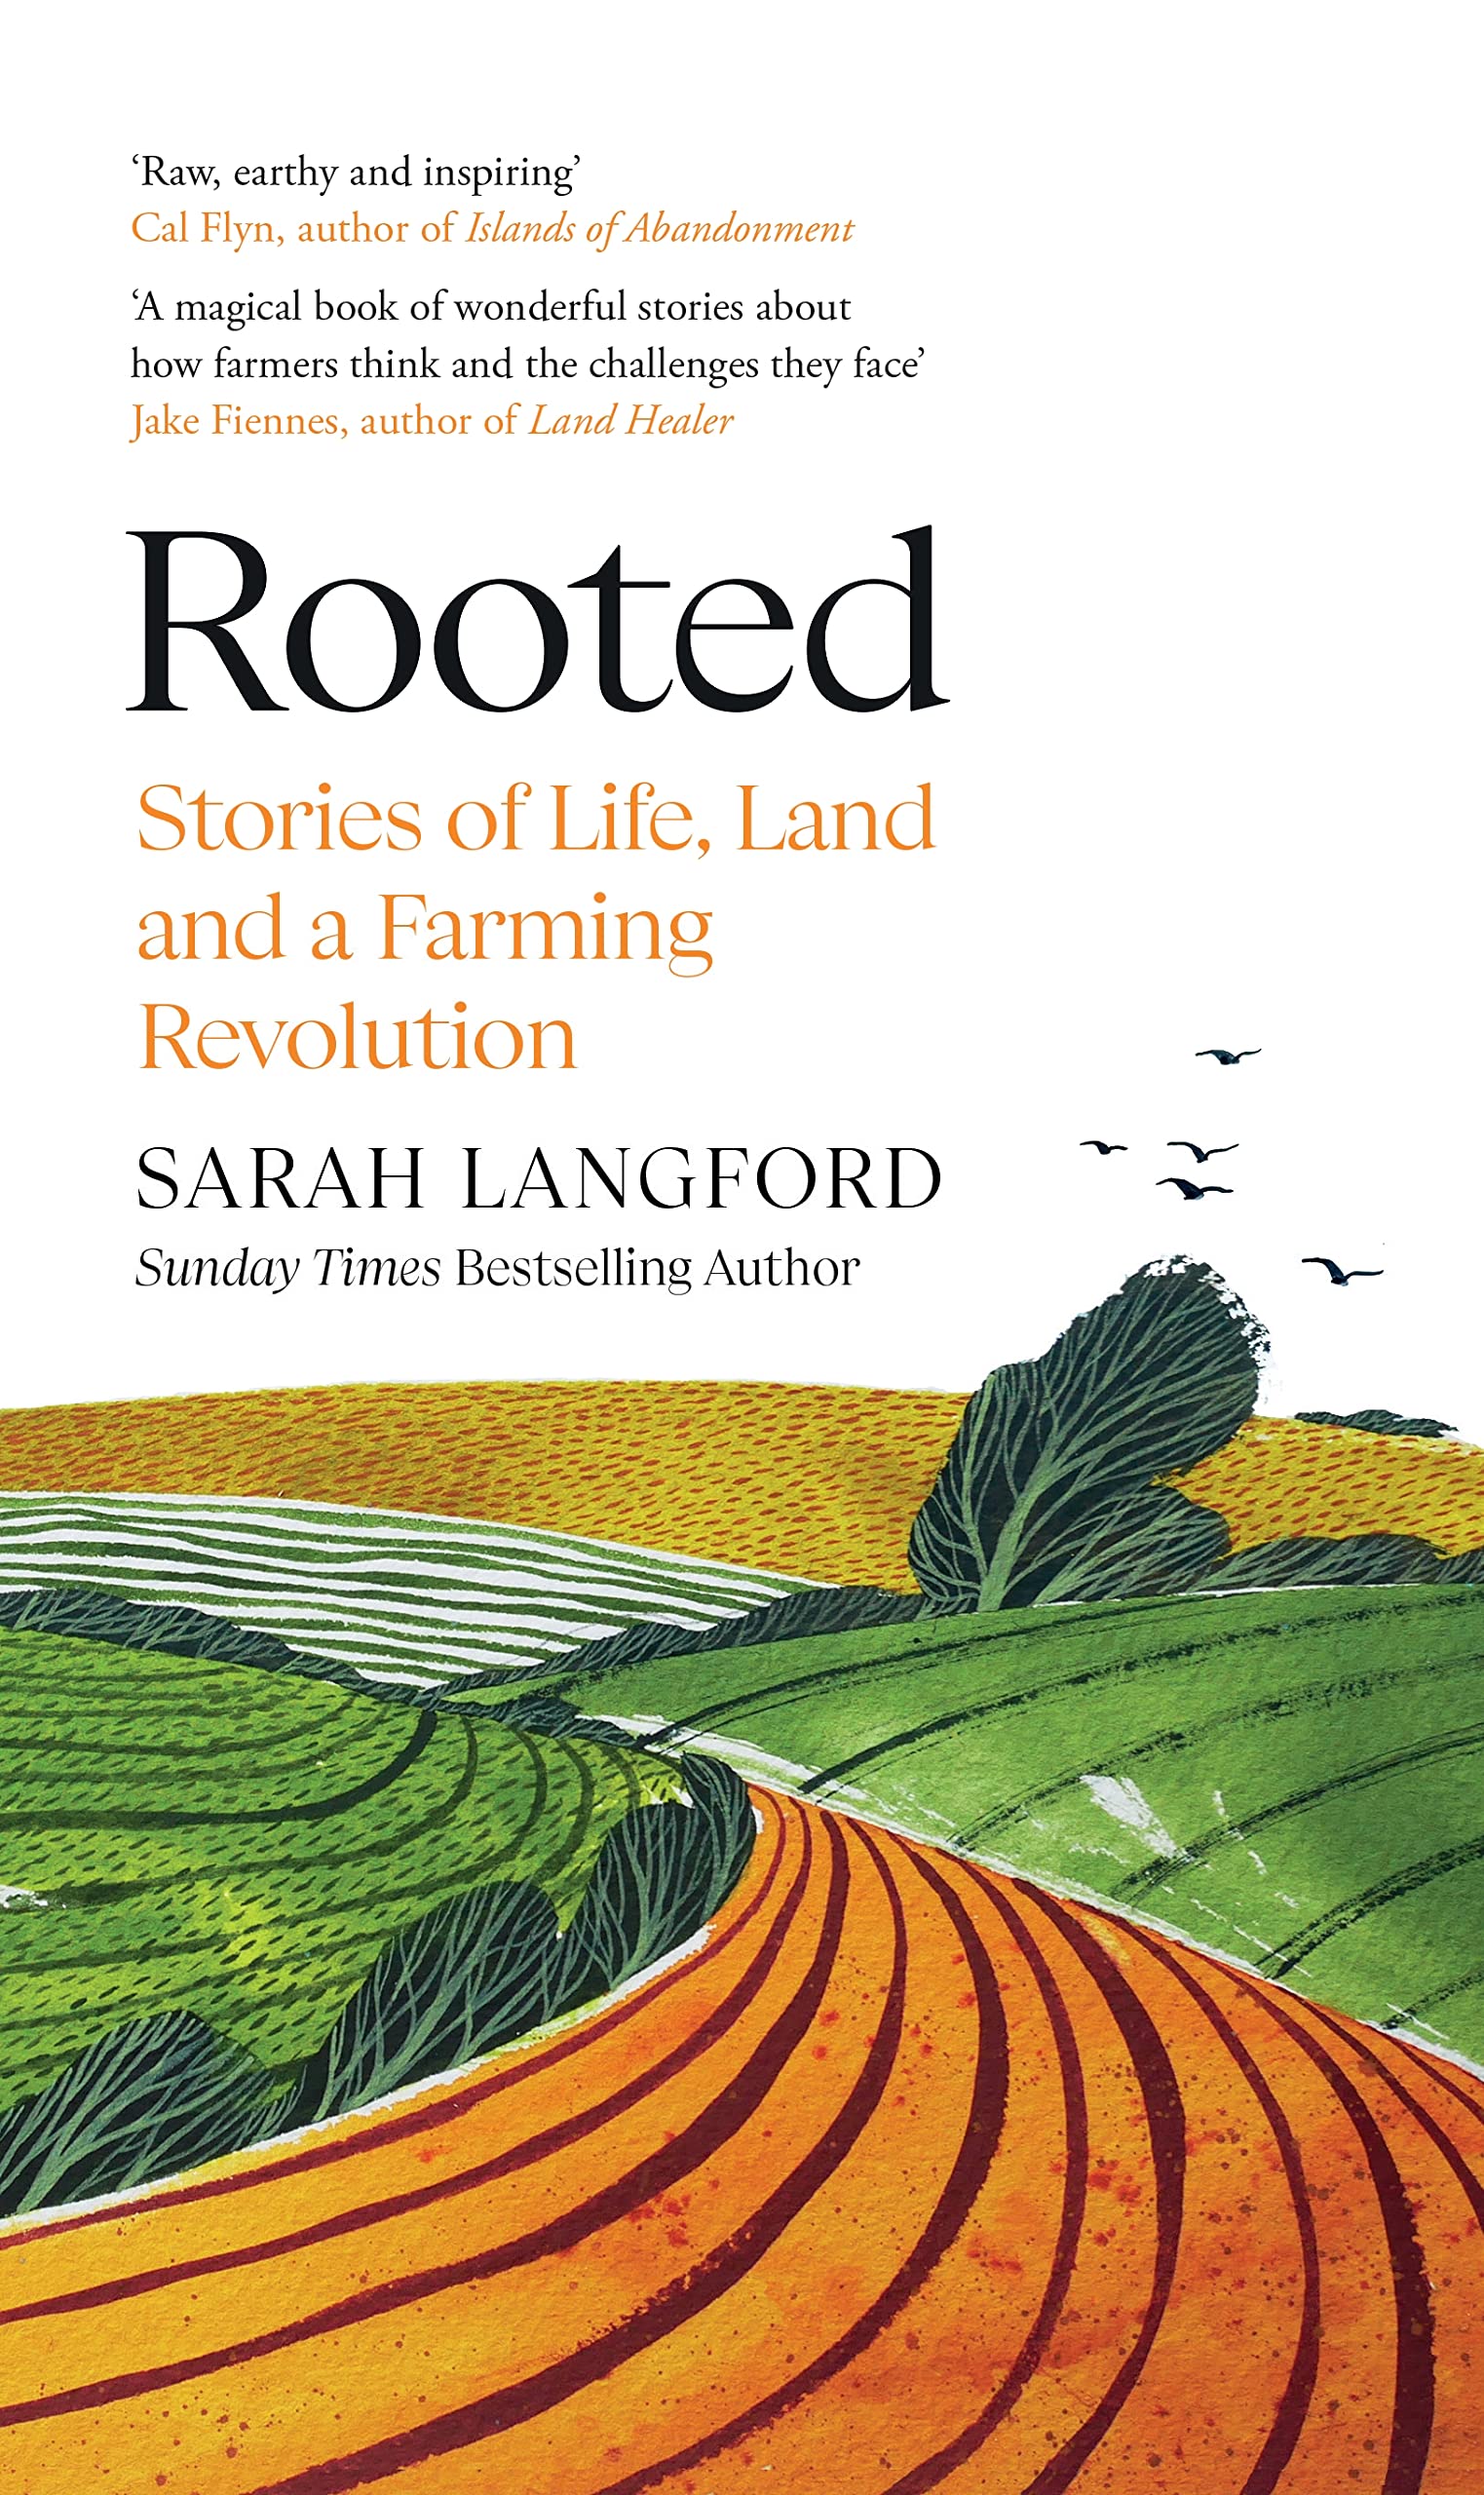 *CANCELLED* Talk and signing with Sarah Longford - Rooted 5/10/22